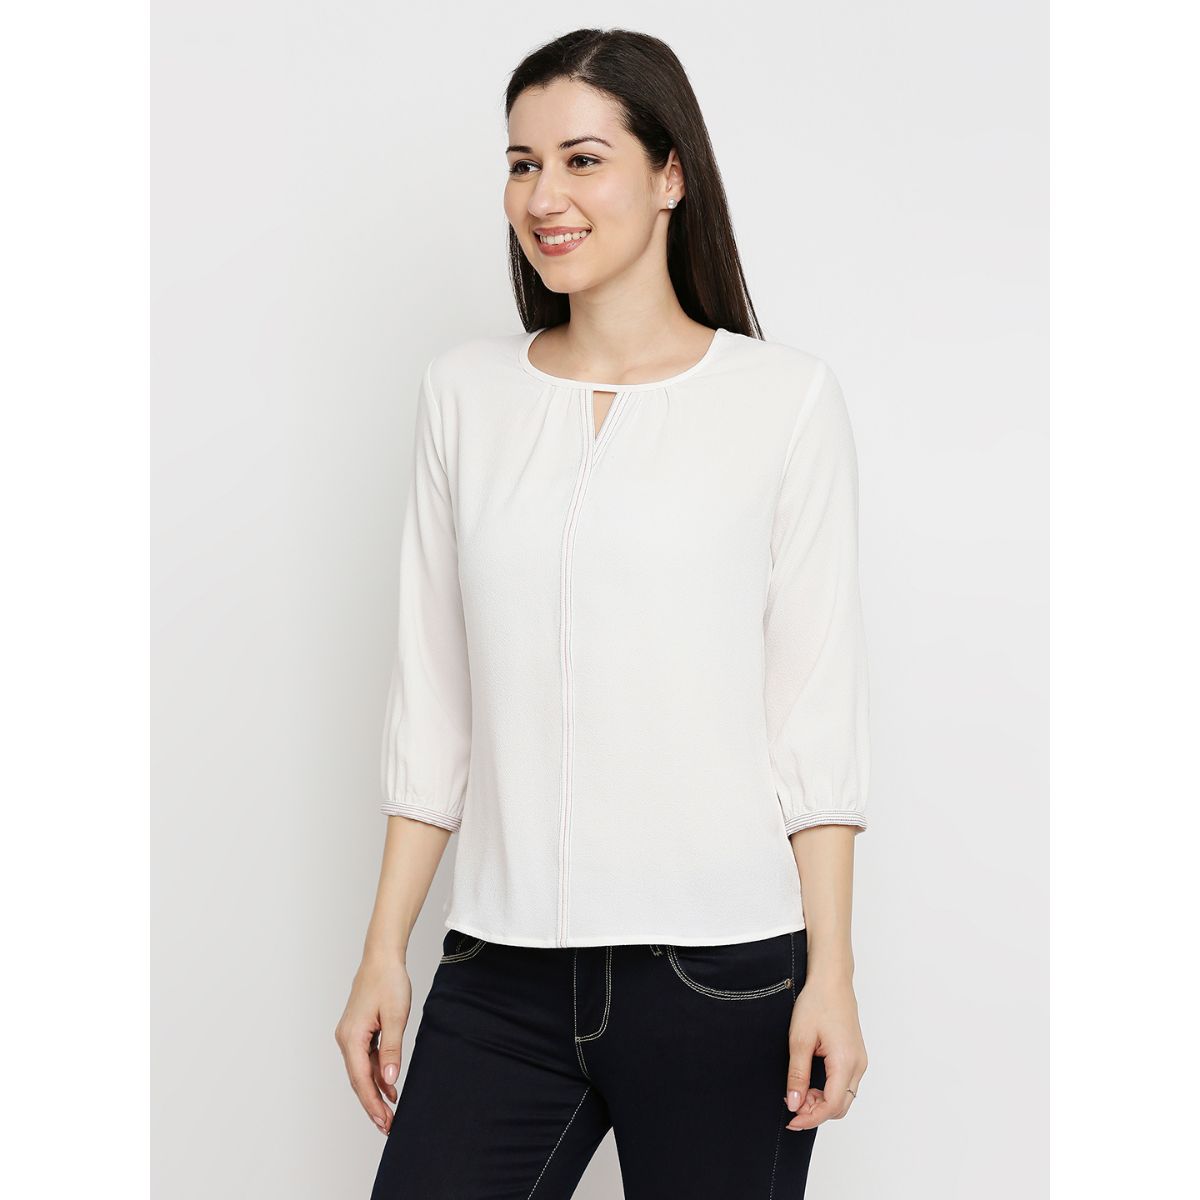 Mantra white solid key hole top